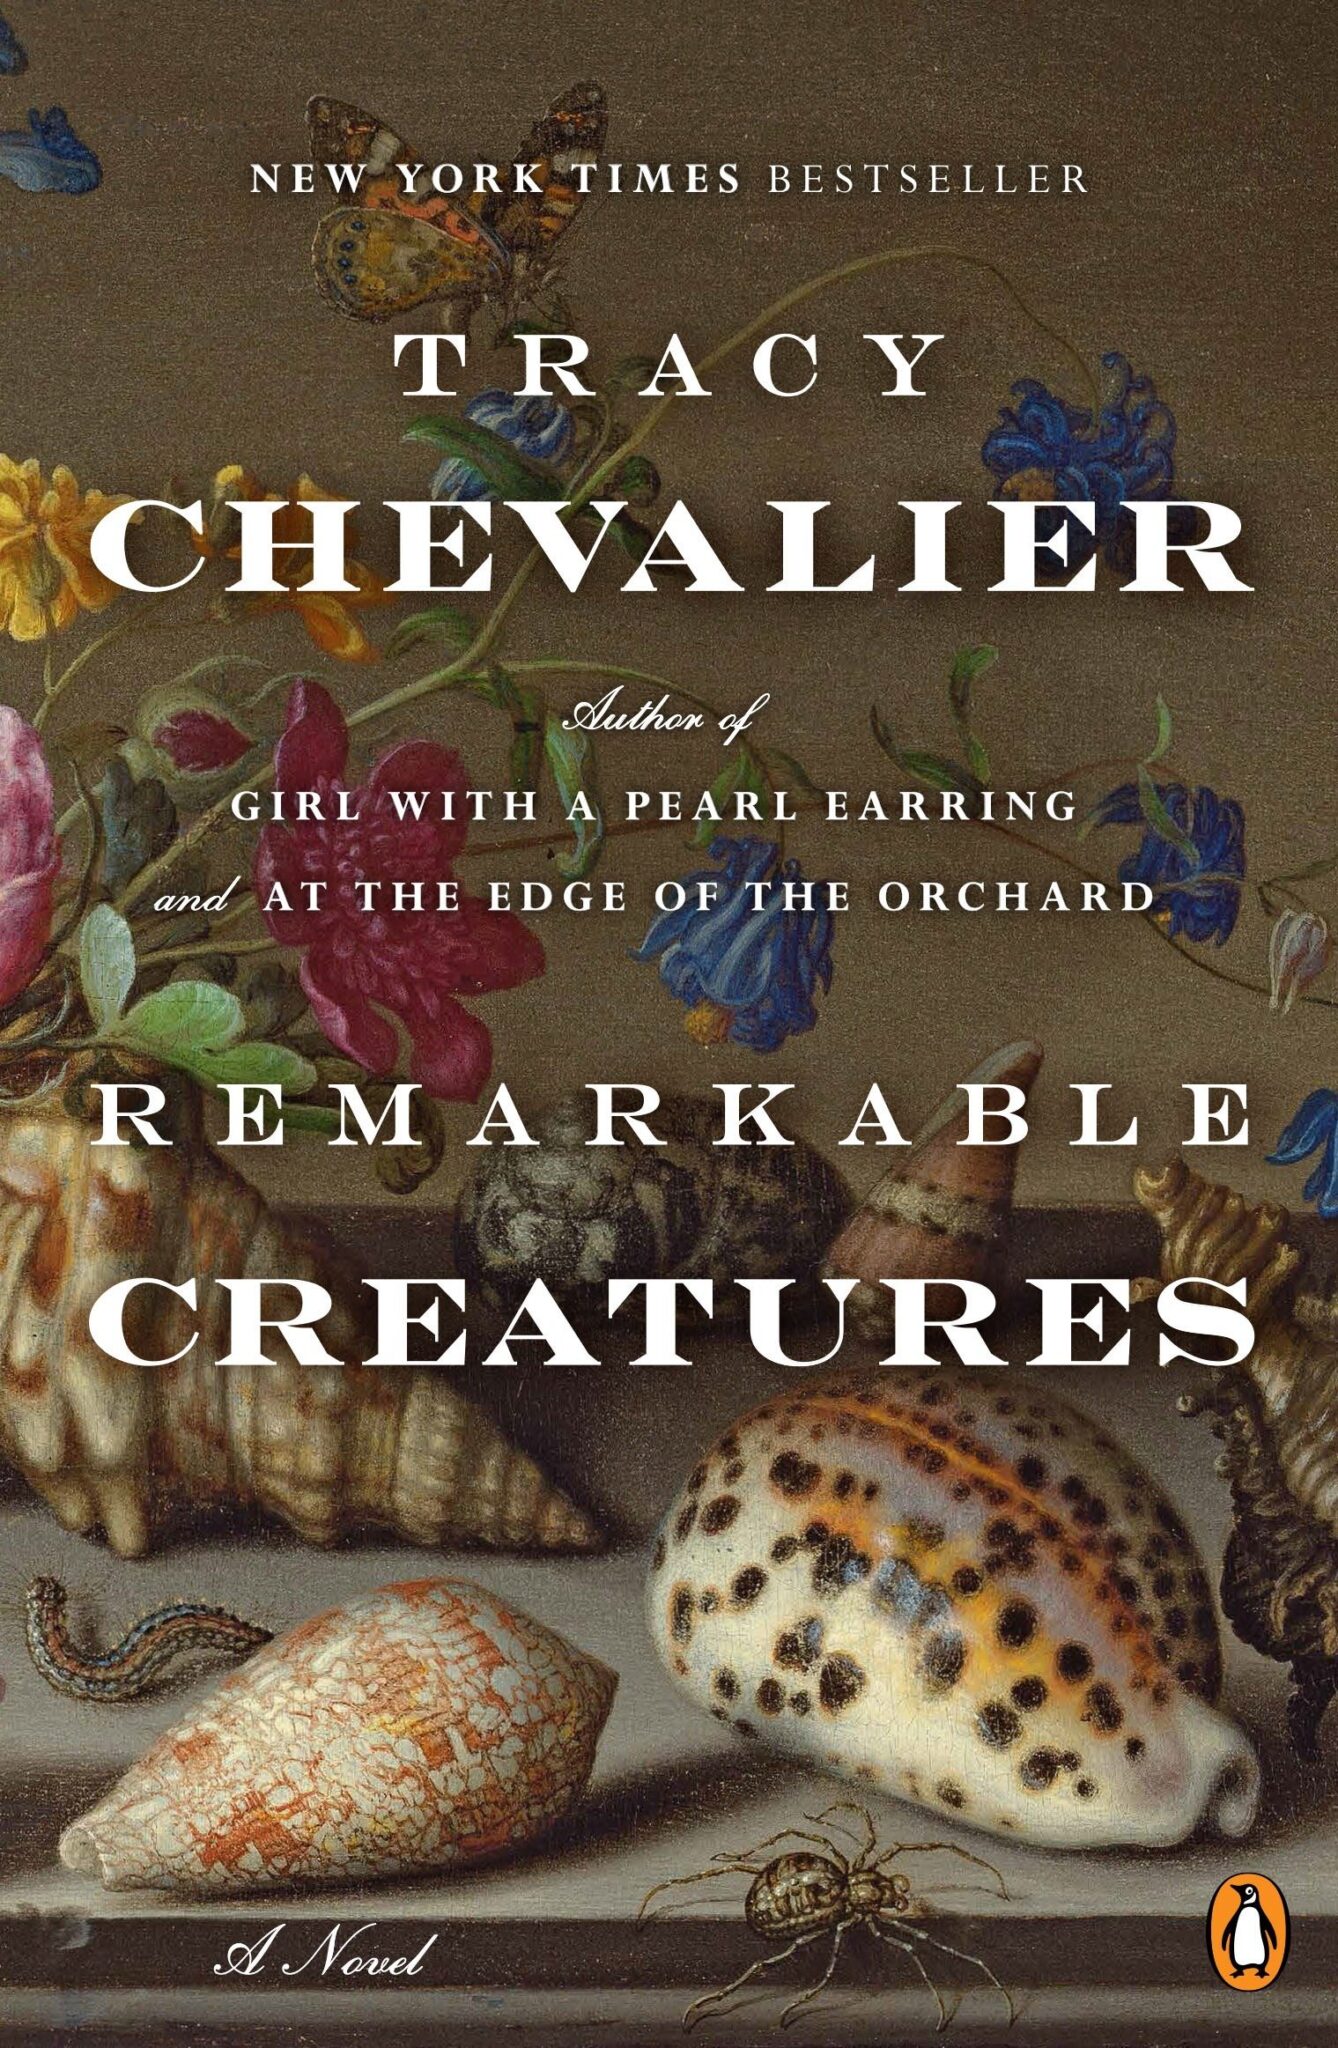 book cover of Remarkable Creatures